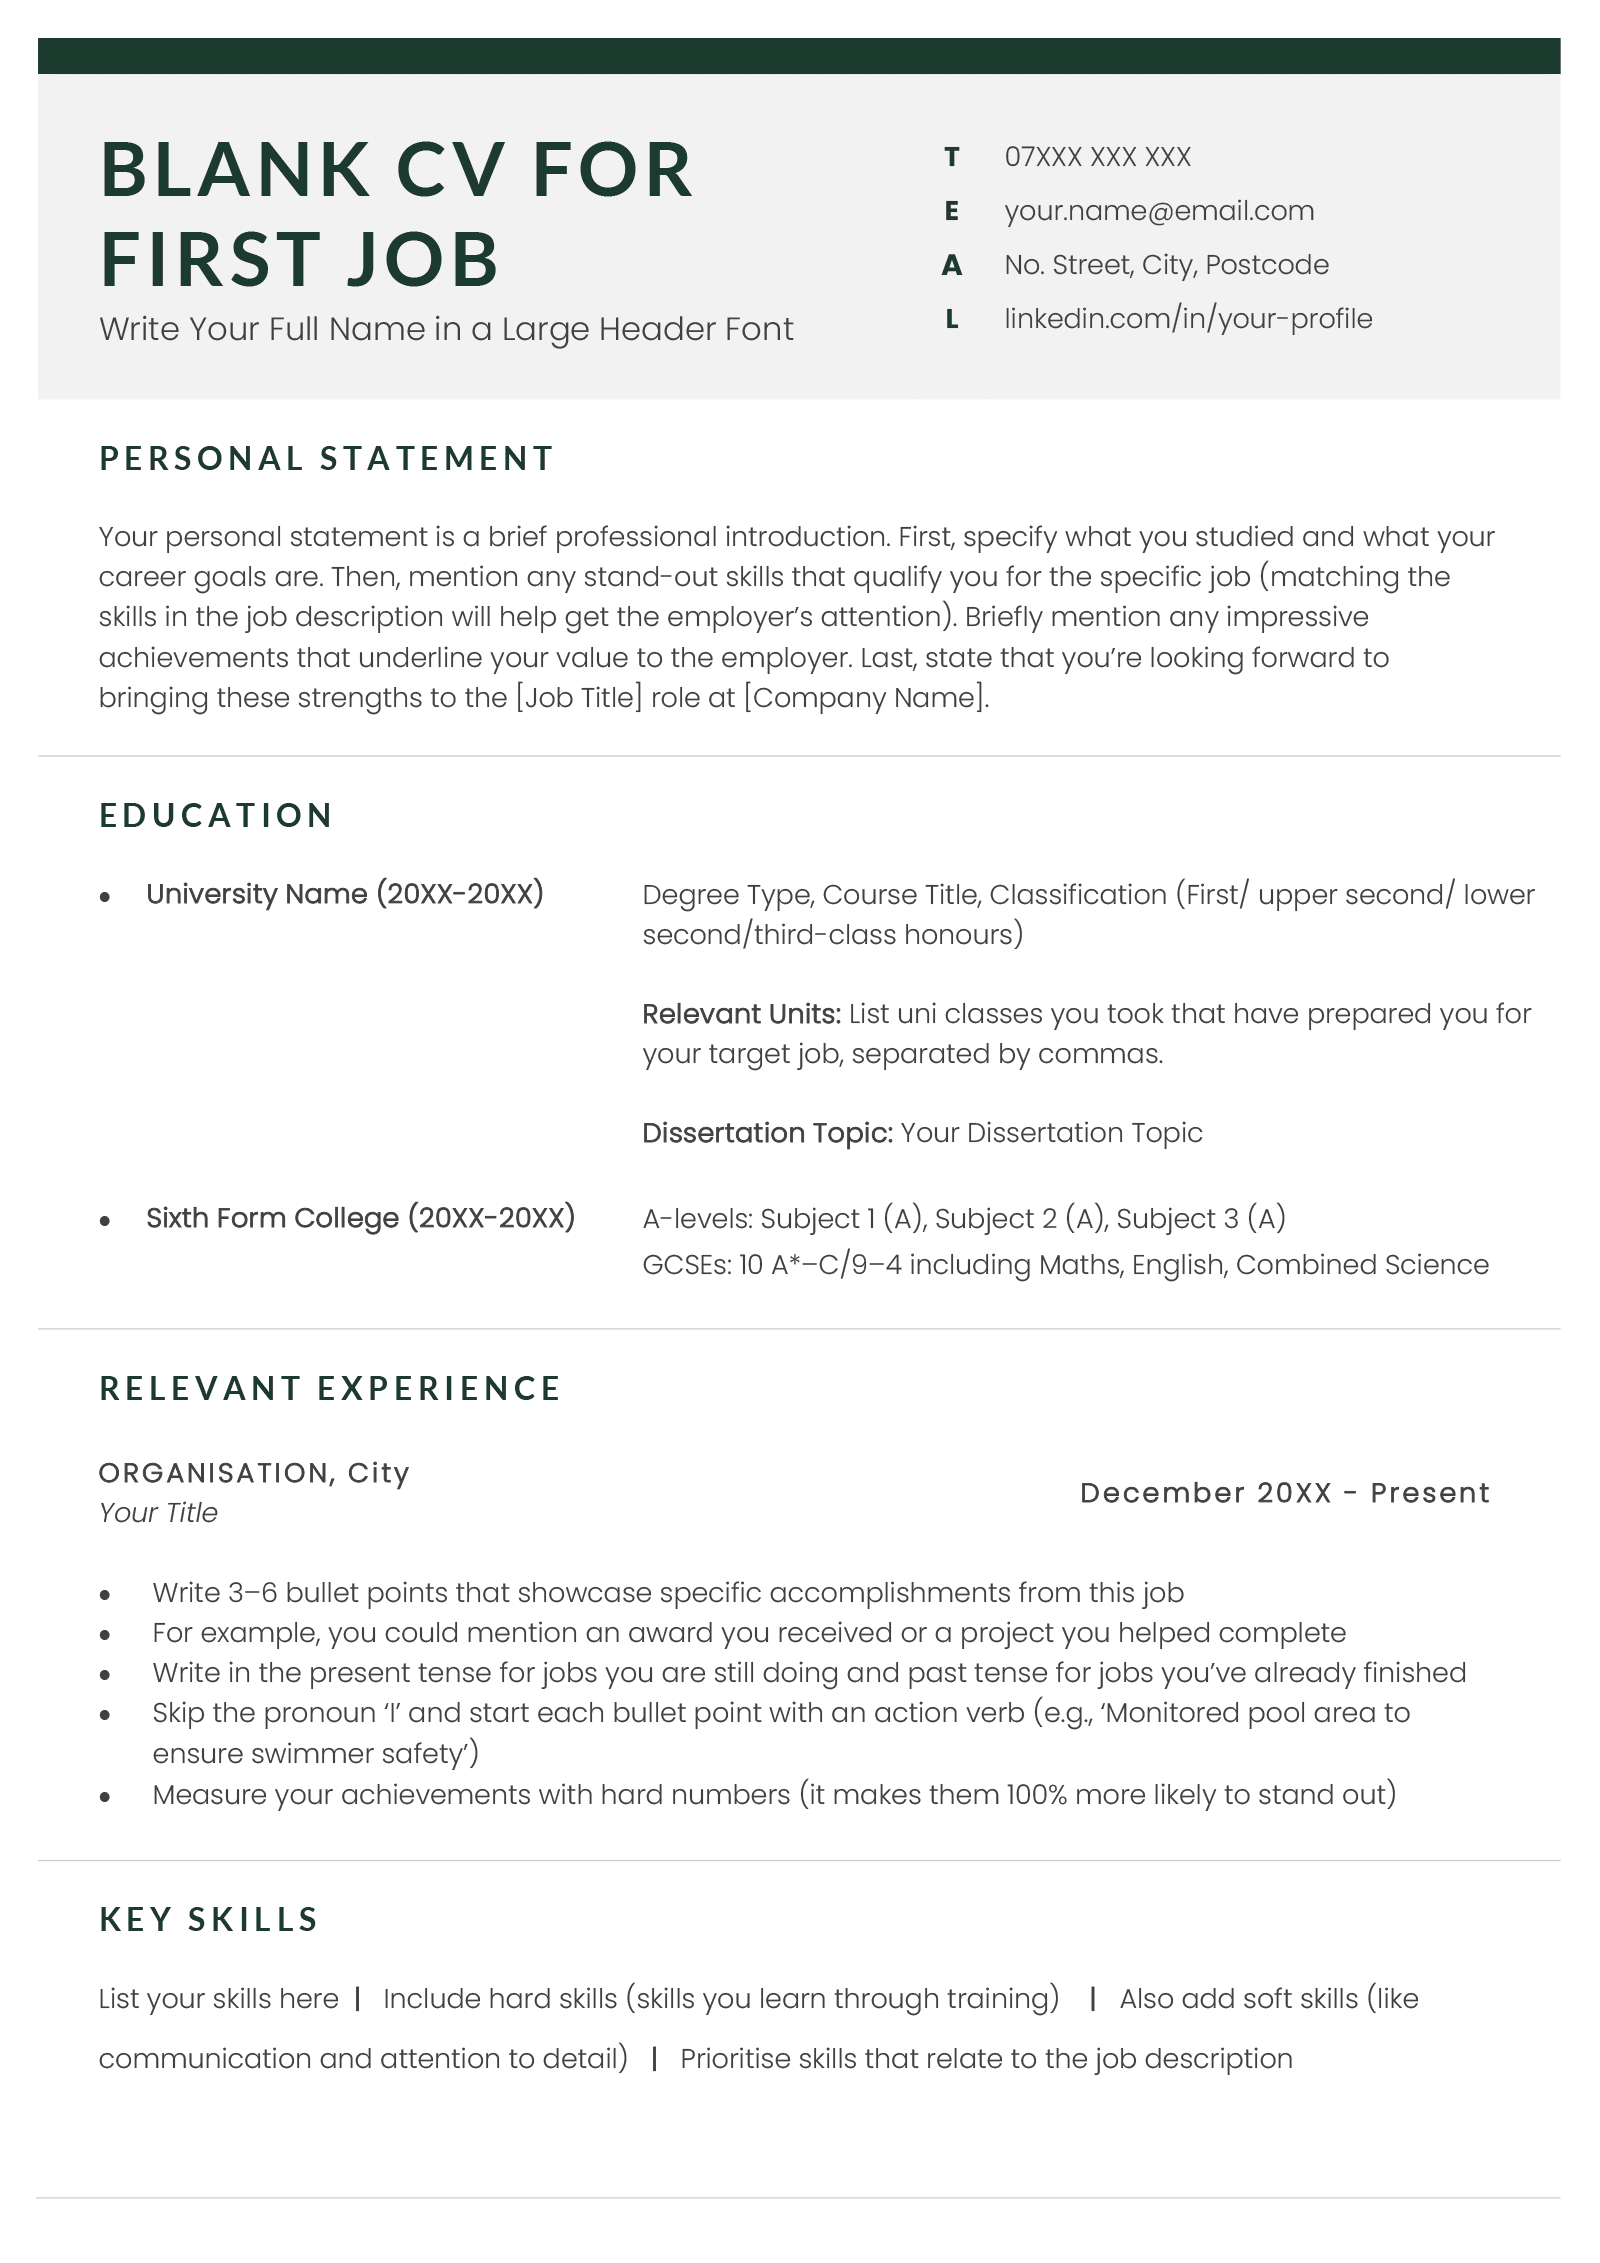 A good CV example for a first job that you can download and fill in yourself along with instructions.